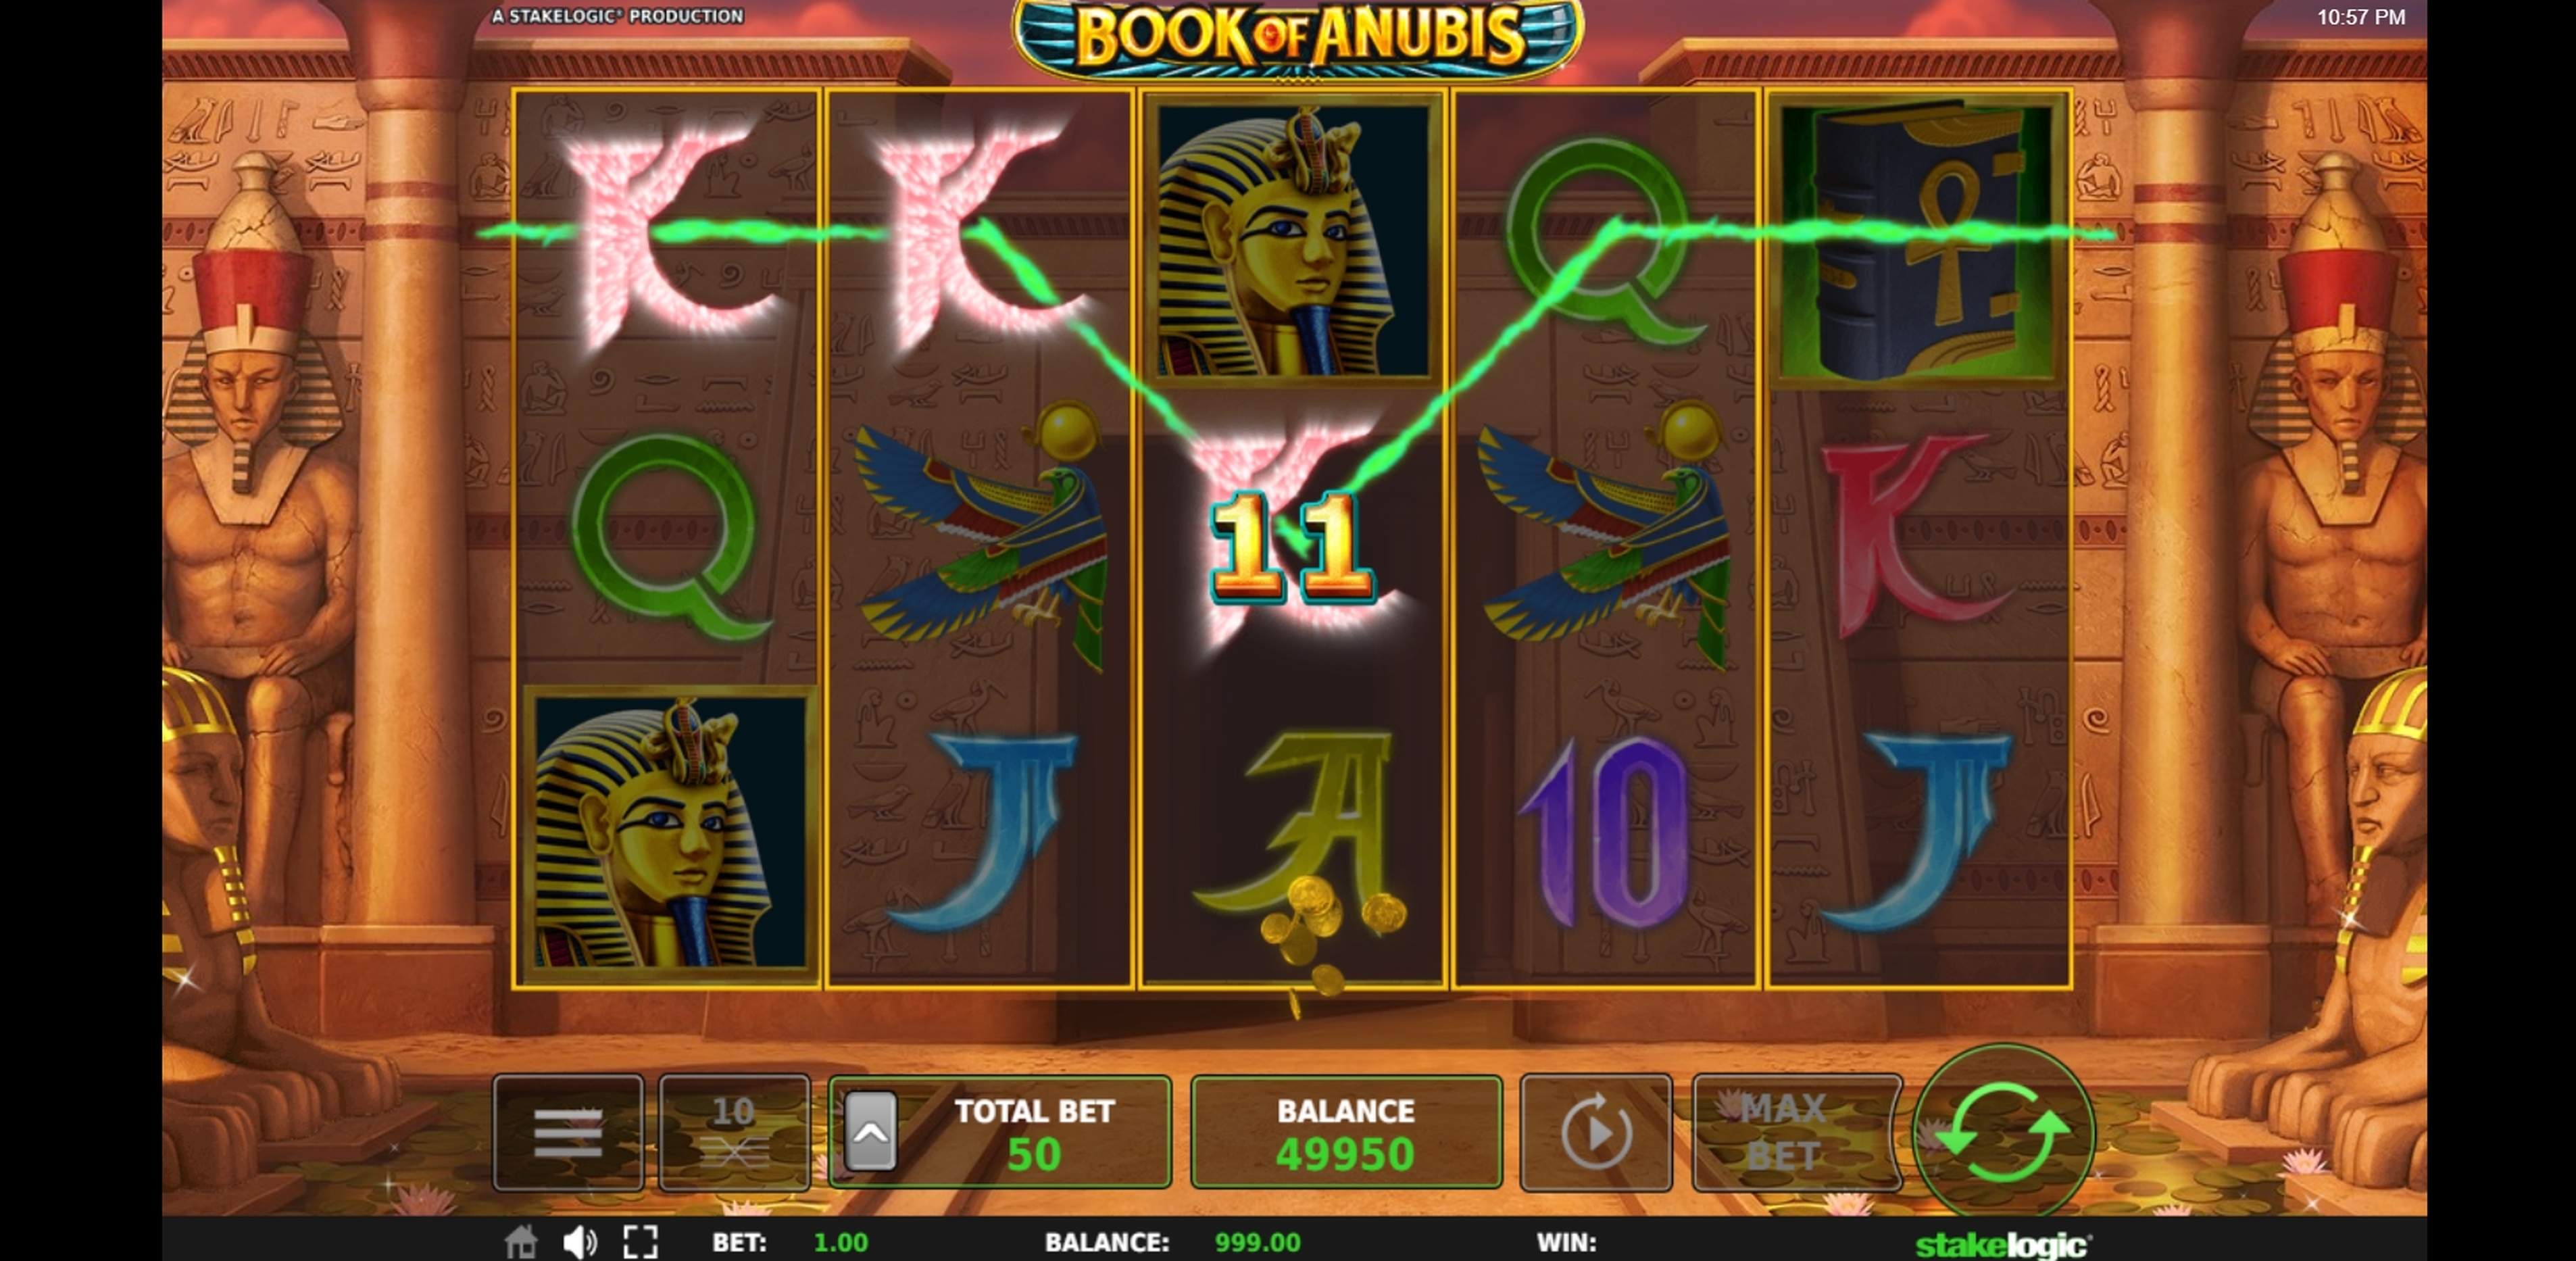 Win Money in Book of Anubis Free Slot Game by Stakelogic